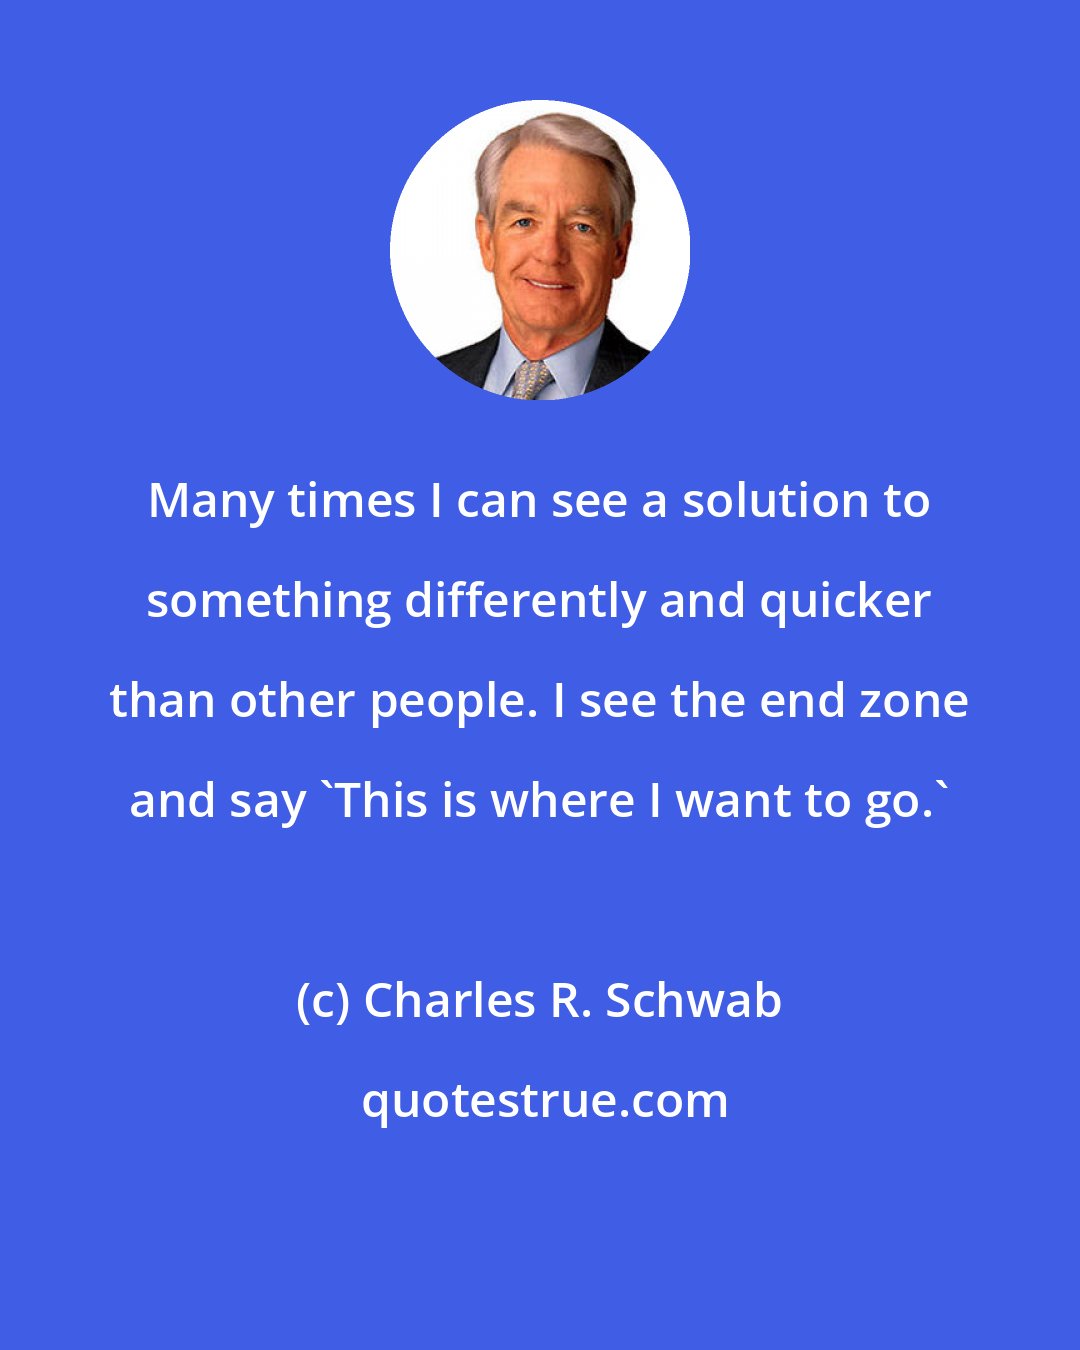 Charles R. Schwab: Many times I can see a solution to something differently and quicker than other people. I see the end zone and say 'This is where I want to go.'